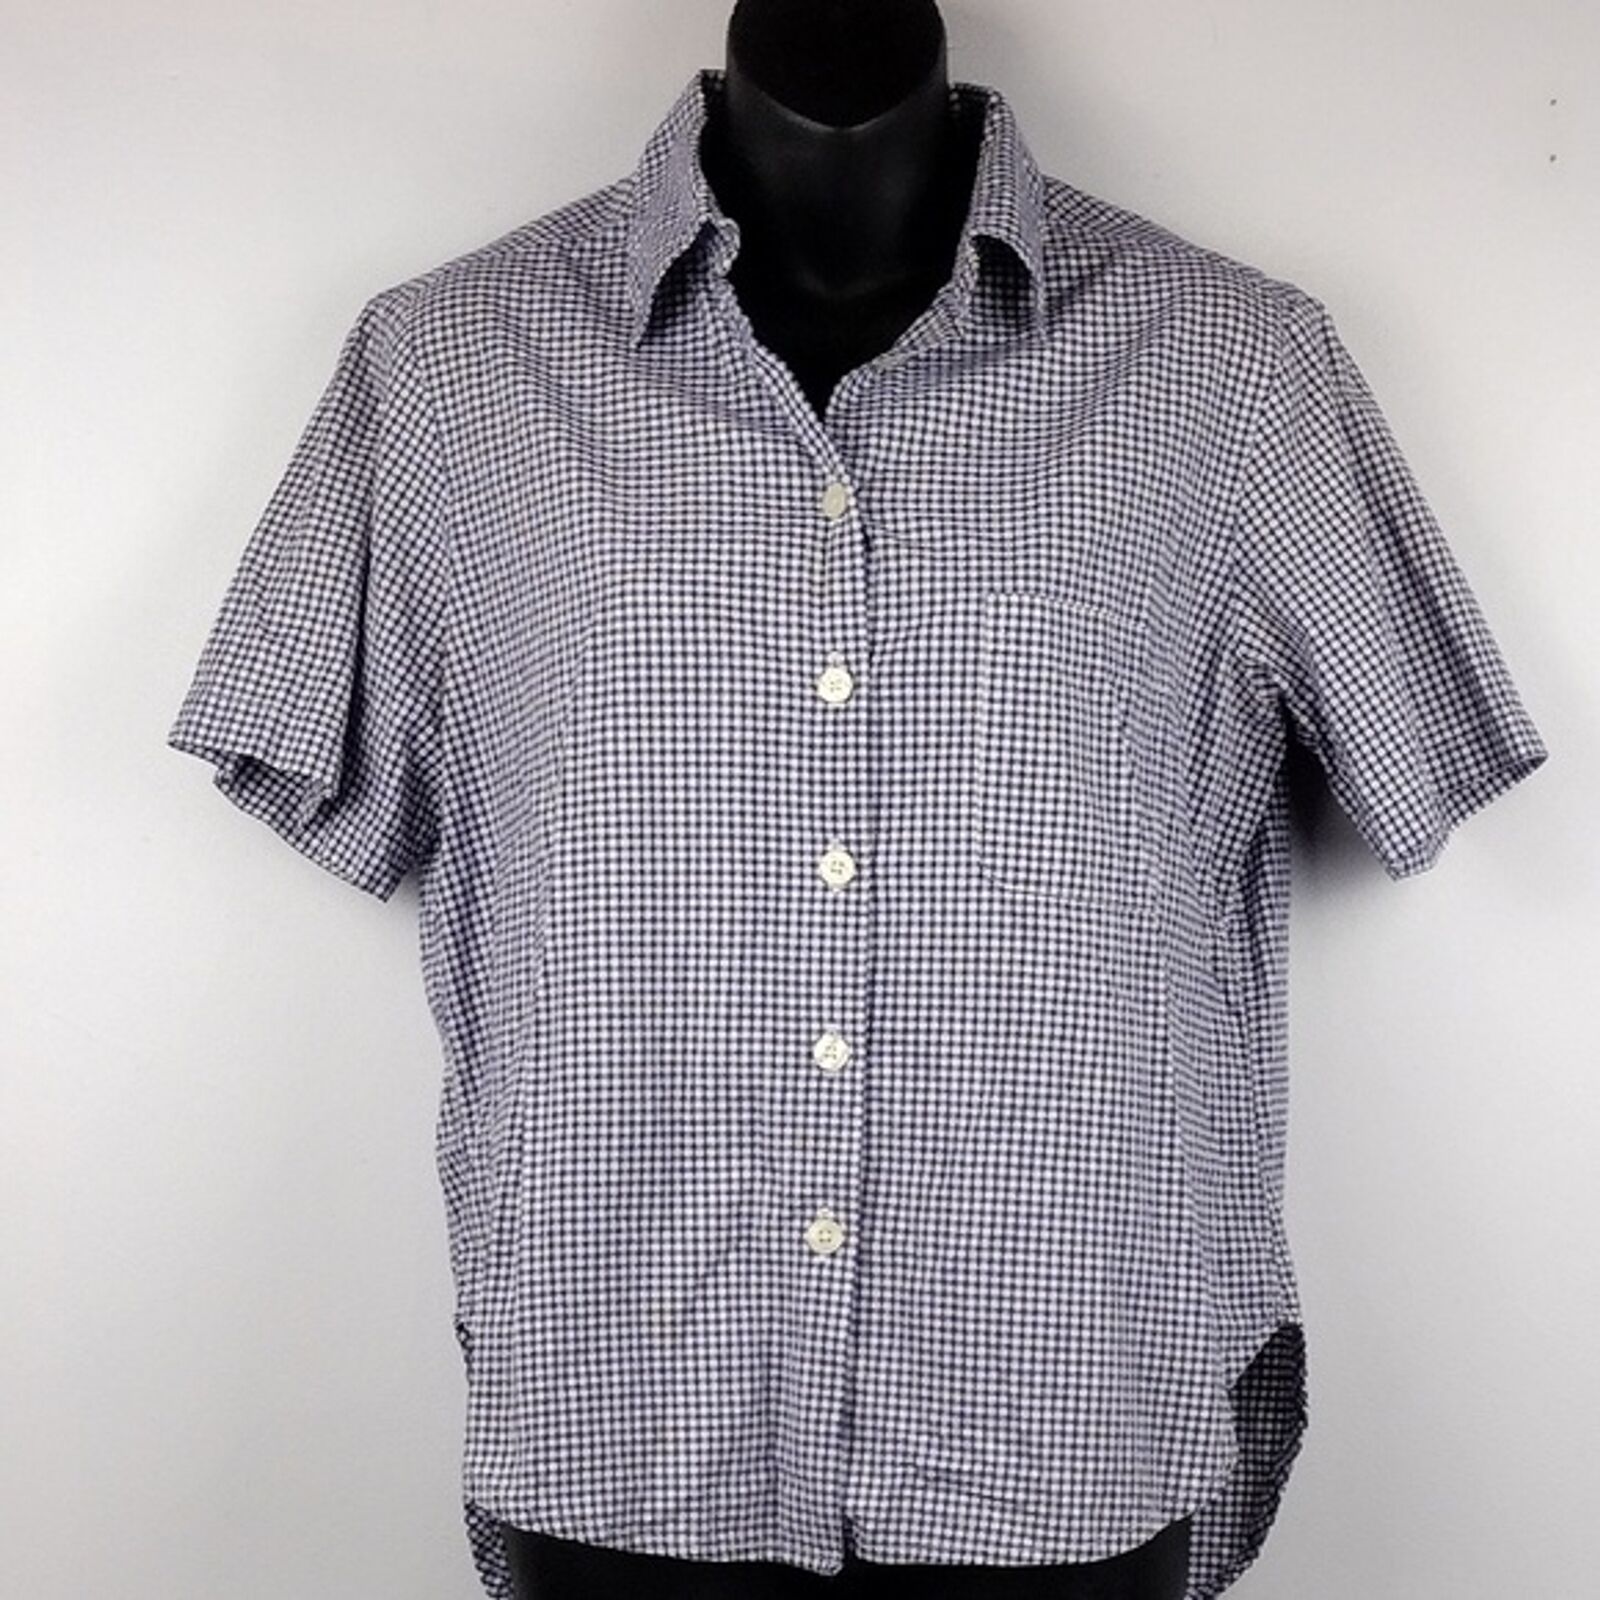 90s The Limited Gingham Shirt - image 1